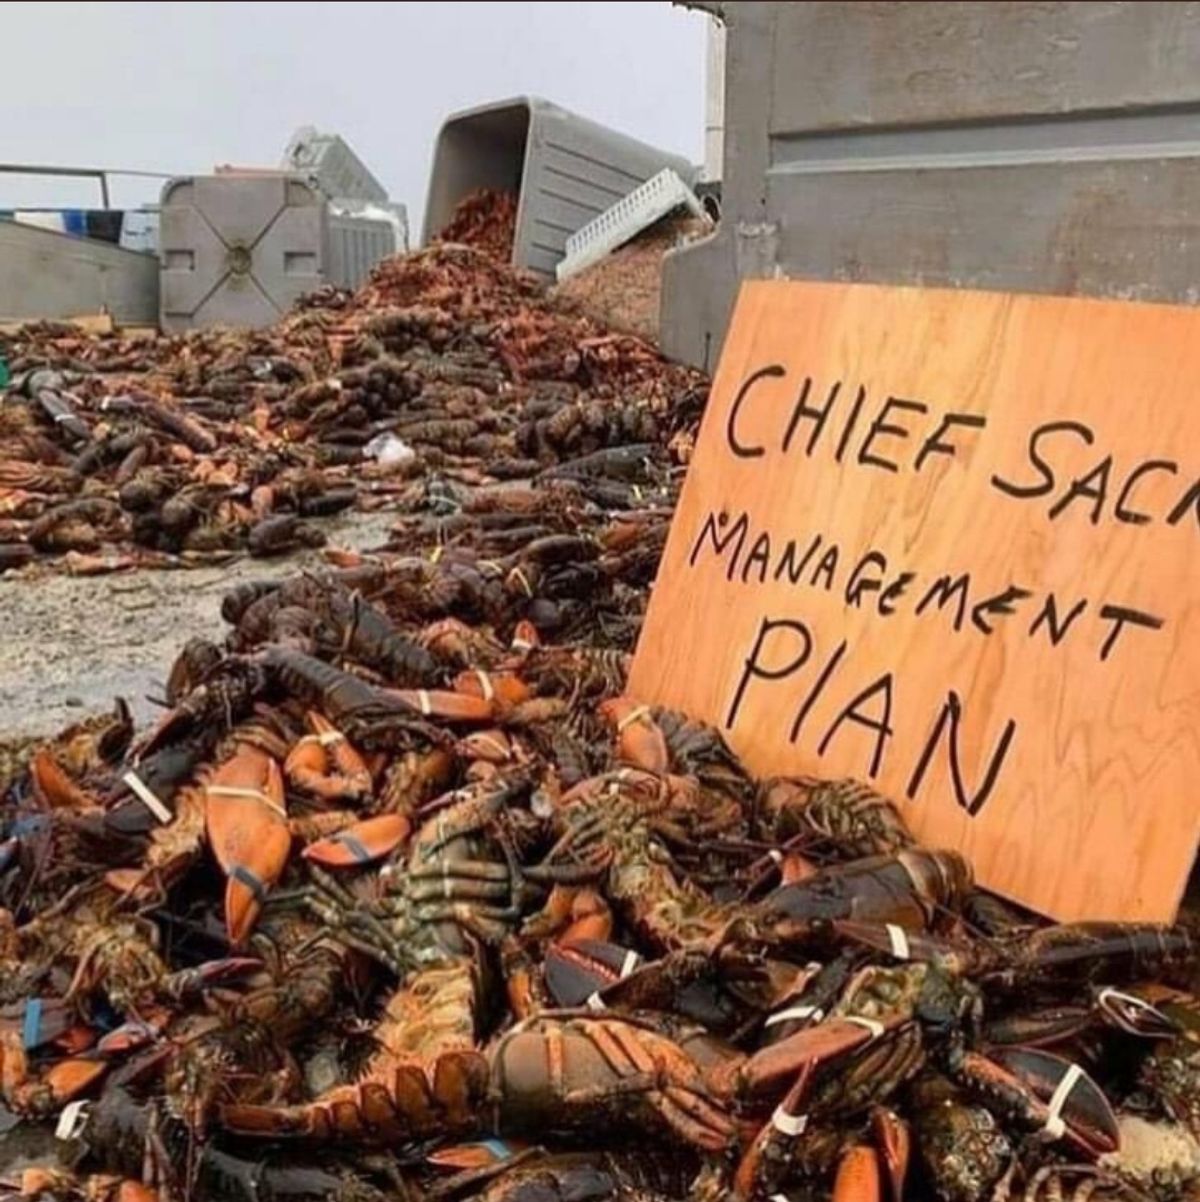 Commercial Fishermen Attack First Nations Lobster Harvest in 'Racist Hate Crime'